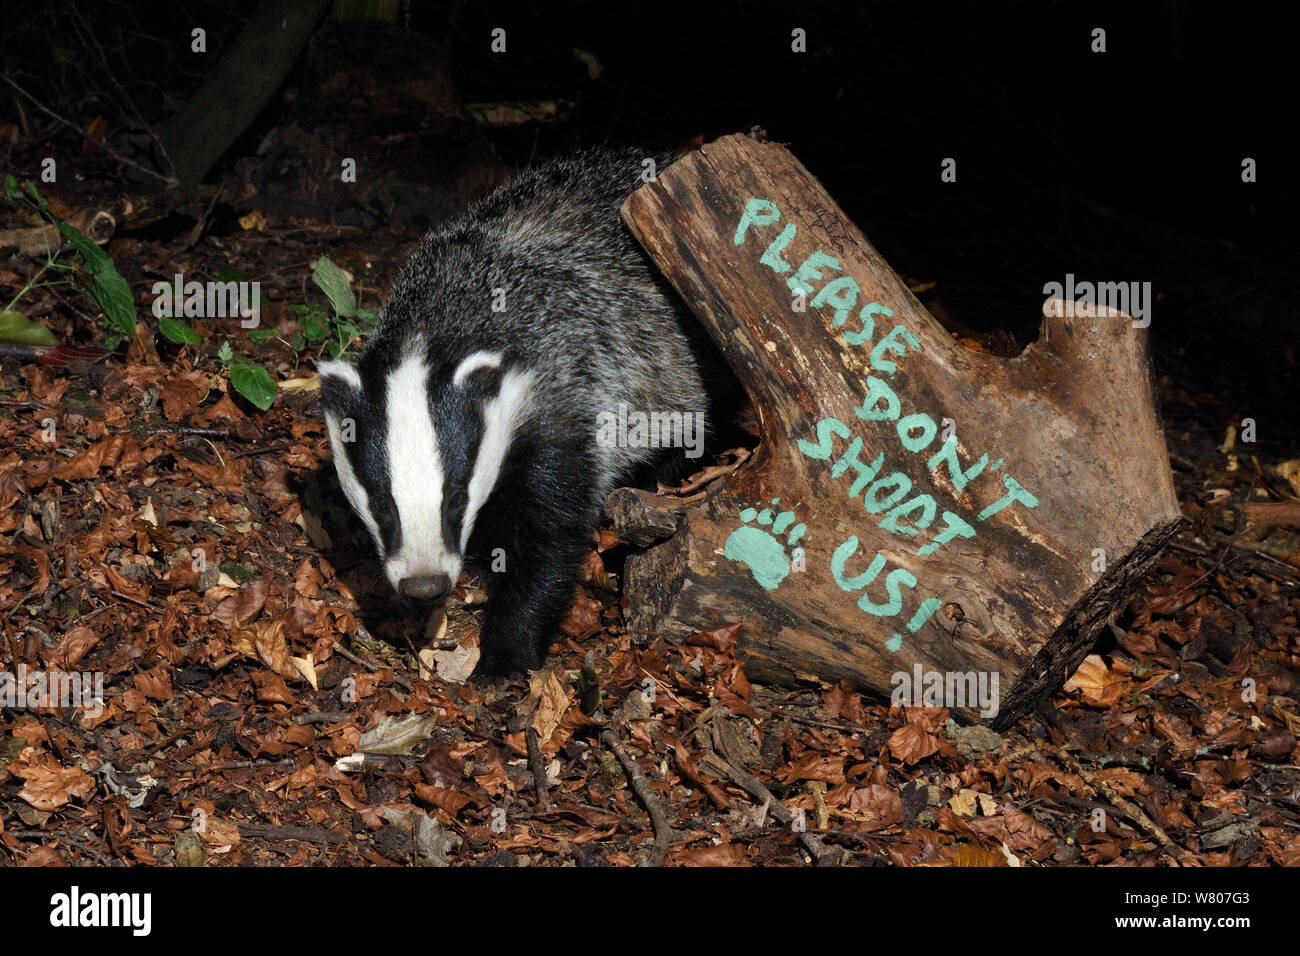 European badger (Meles meles) and message 'Please don't shoot us' protesting against badger culling painted on log. Wiltshire, UK, September 2015.  Taken by a remote camera trap. Stock Photo